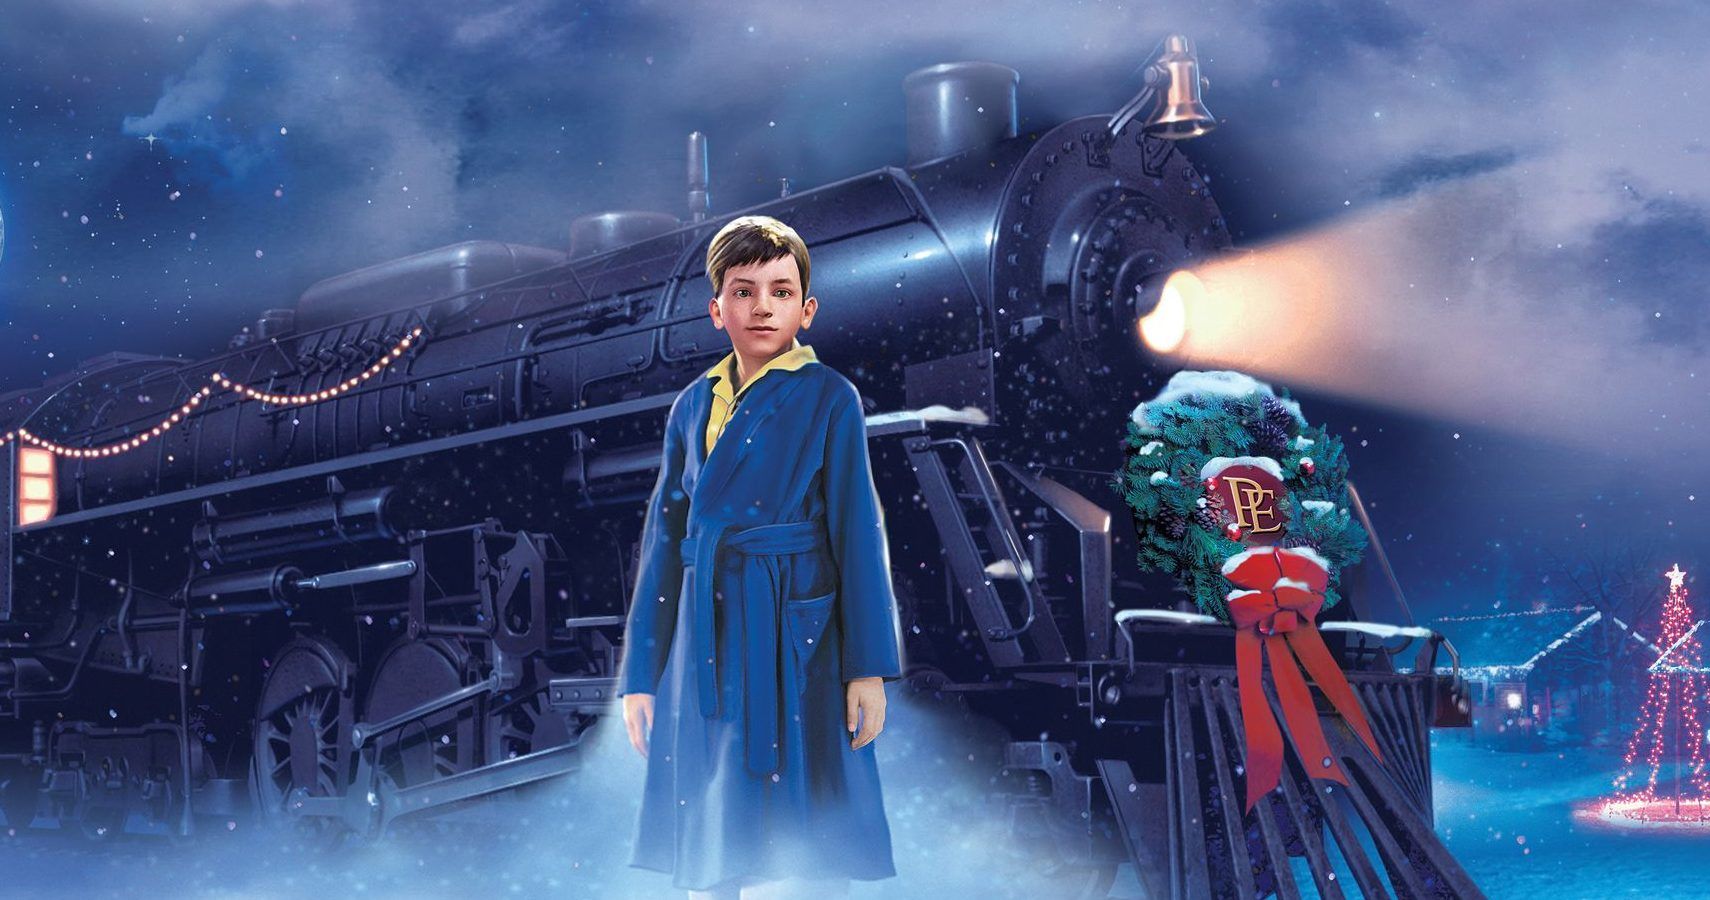 15 Hidden Details You Missed In The Polar Express | ScreenRant